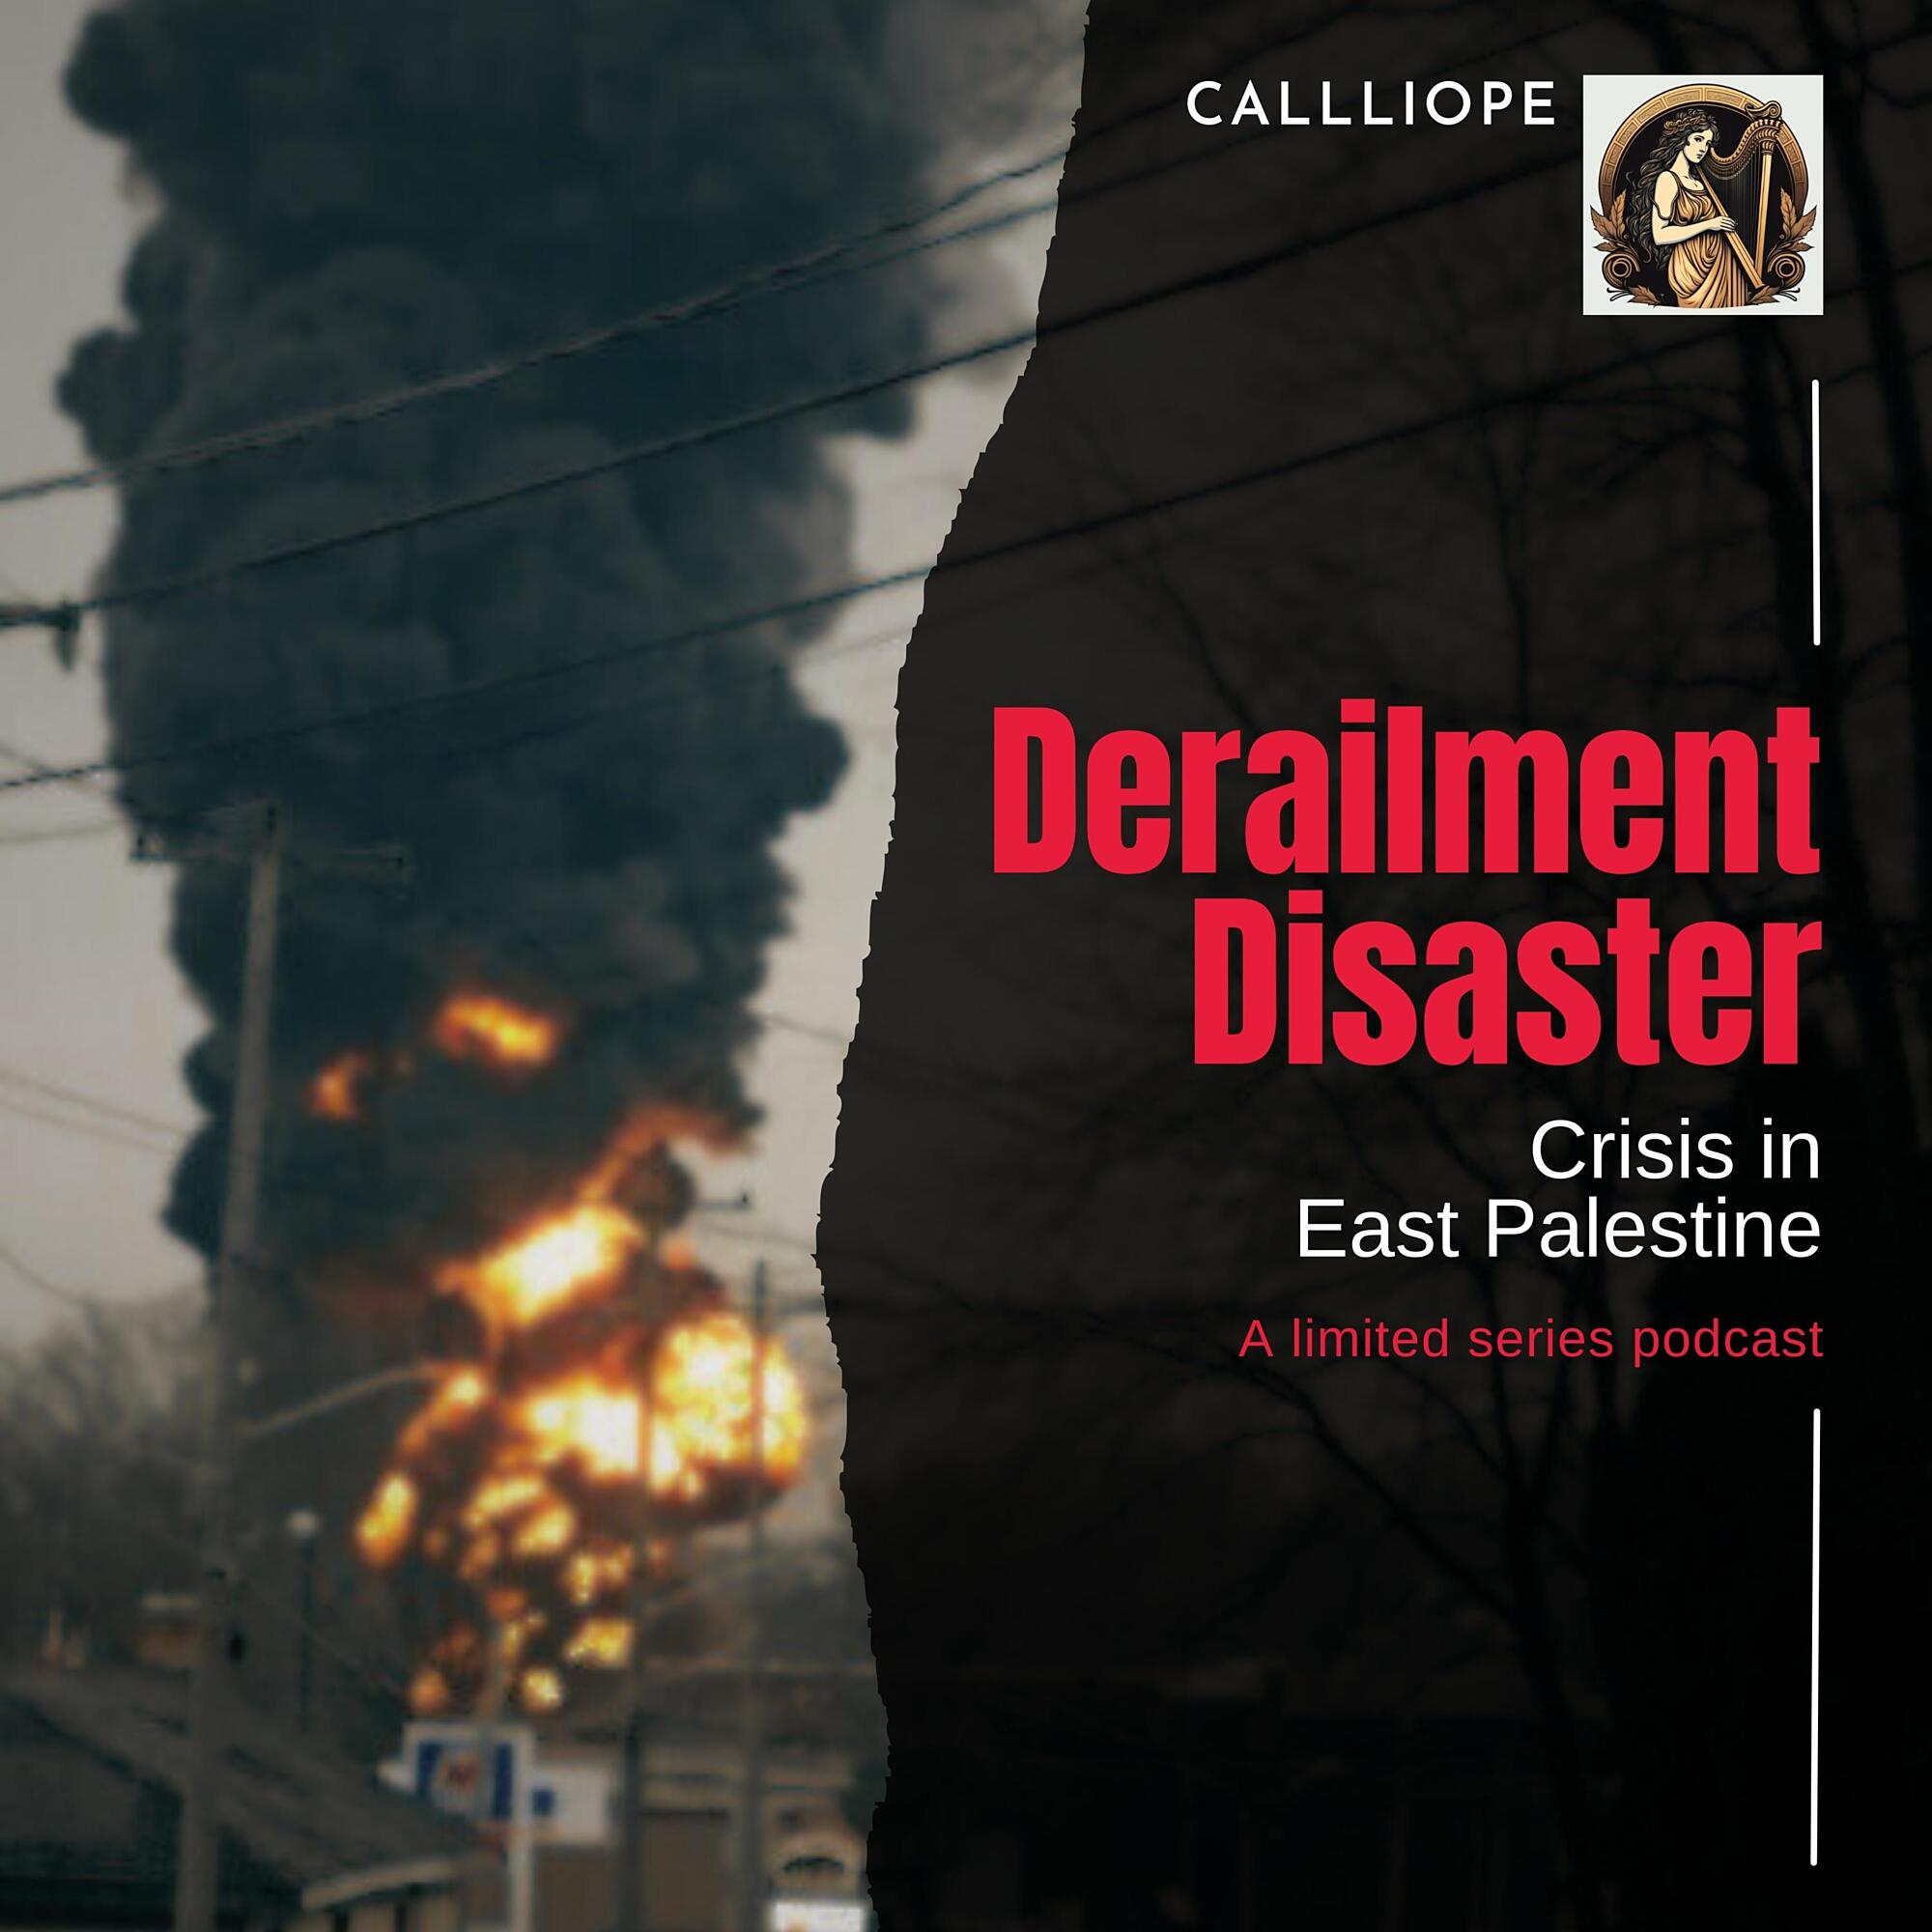  Podcast Looks At East Palestine Train Derailment And Chemical Leak